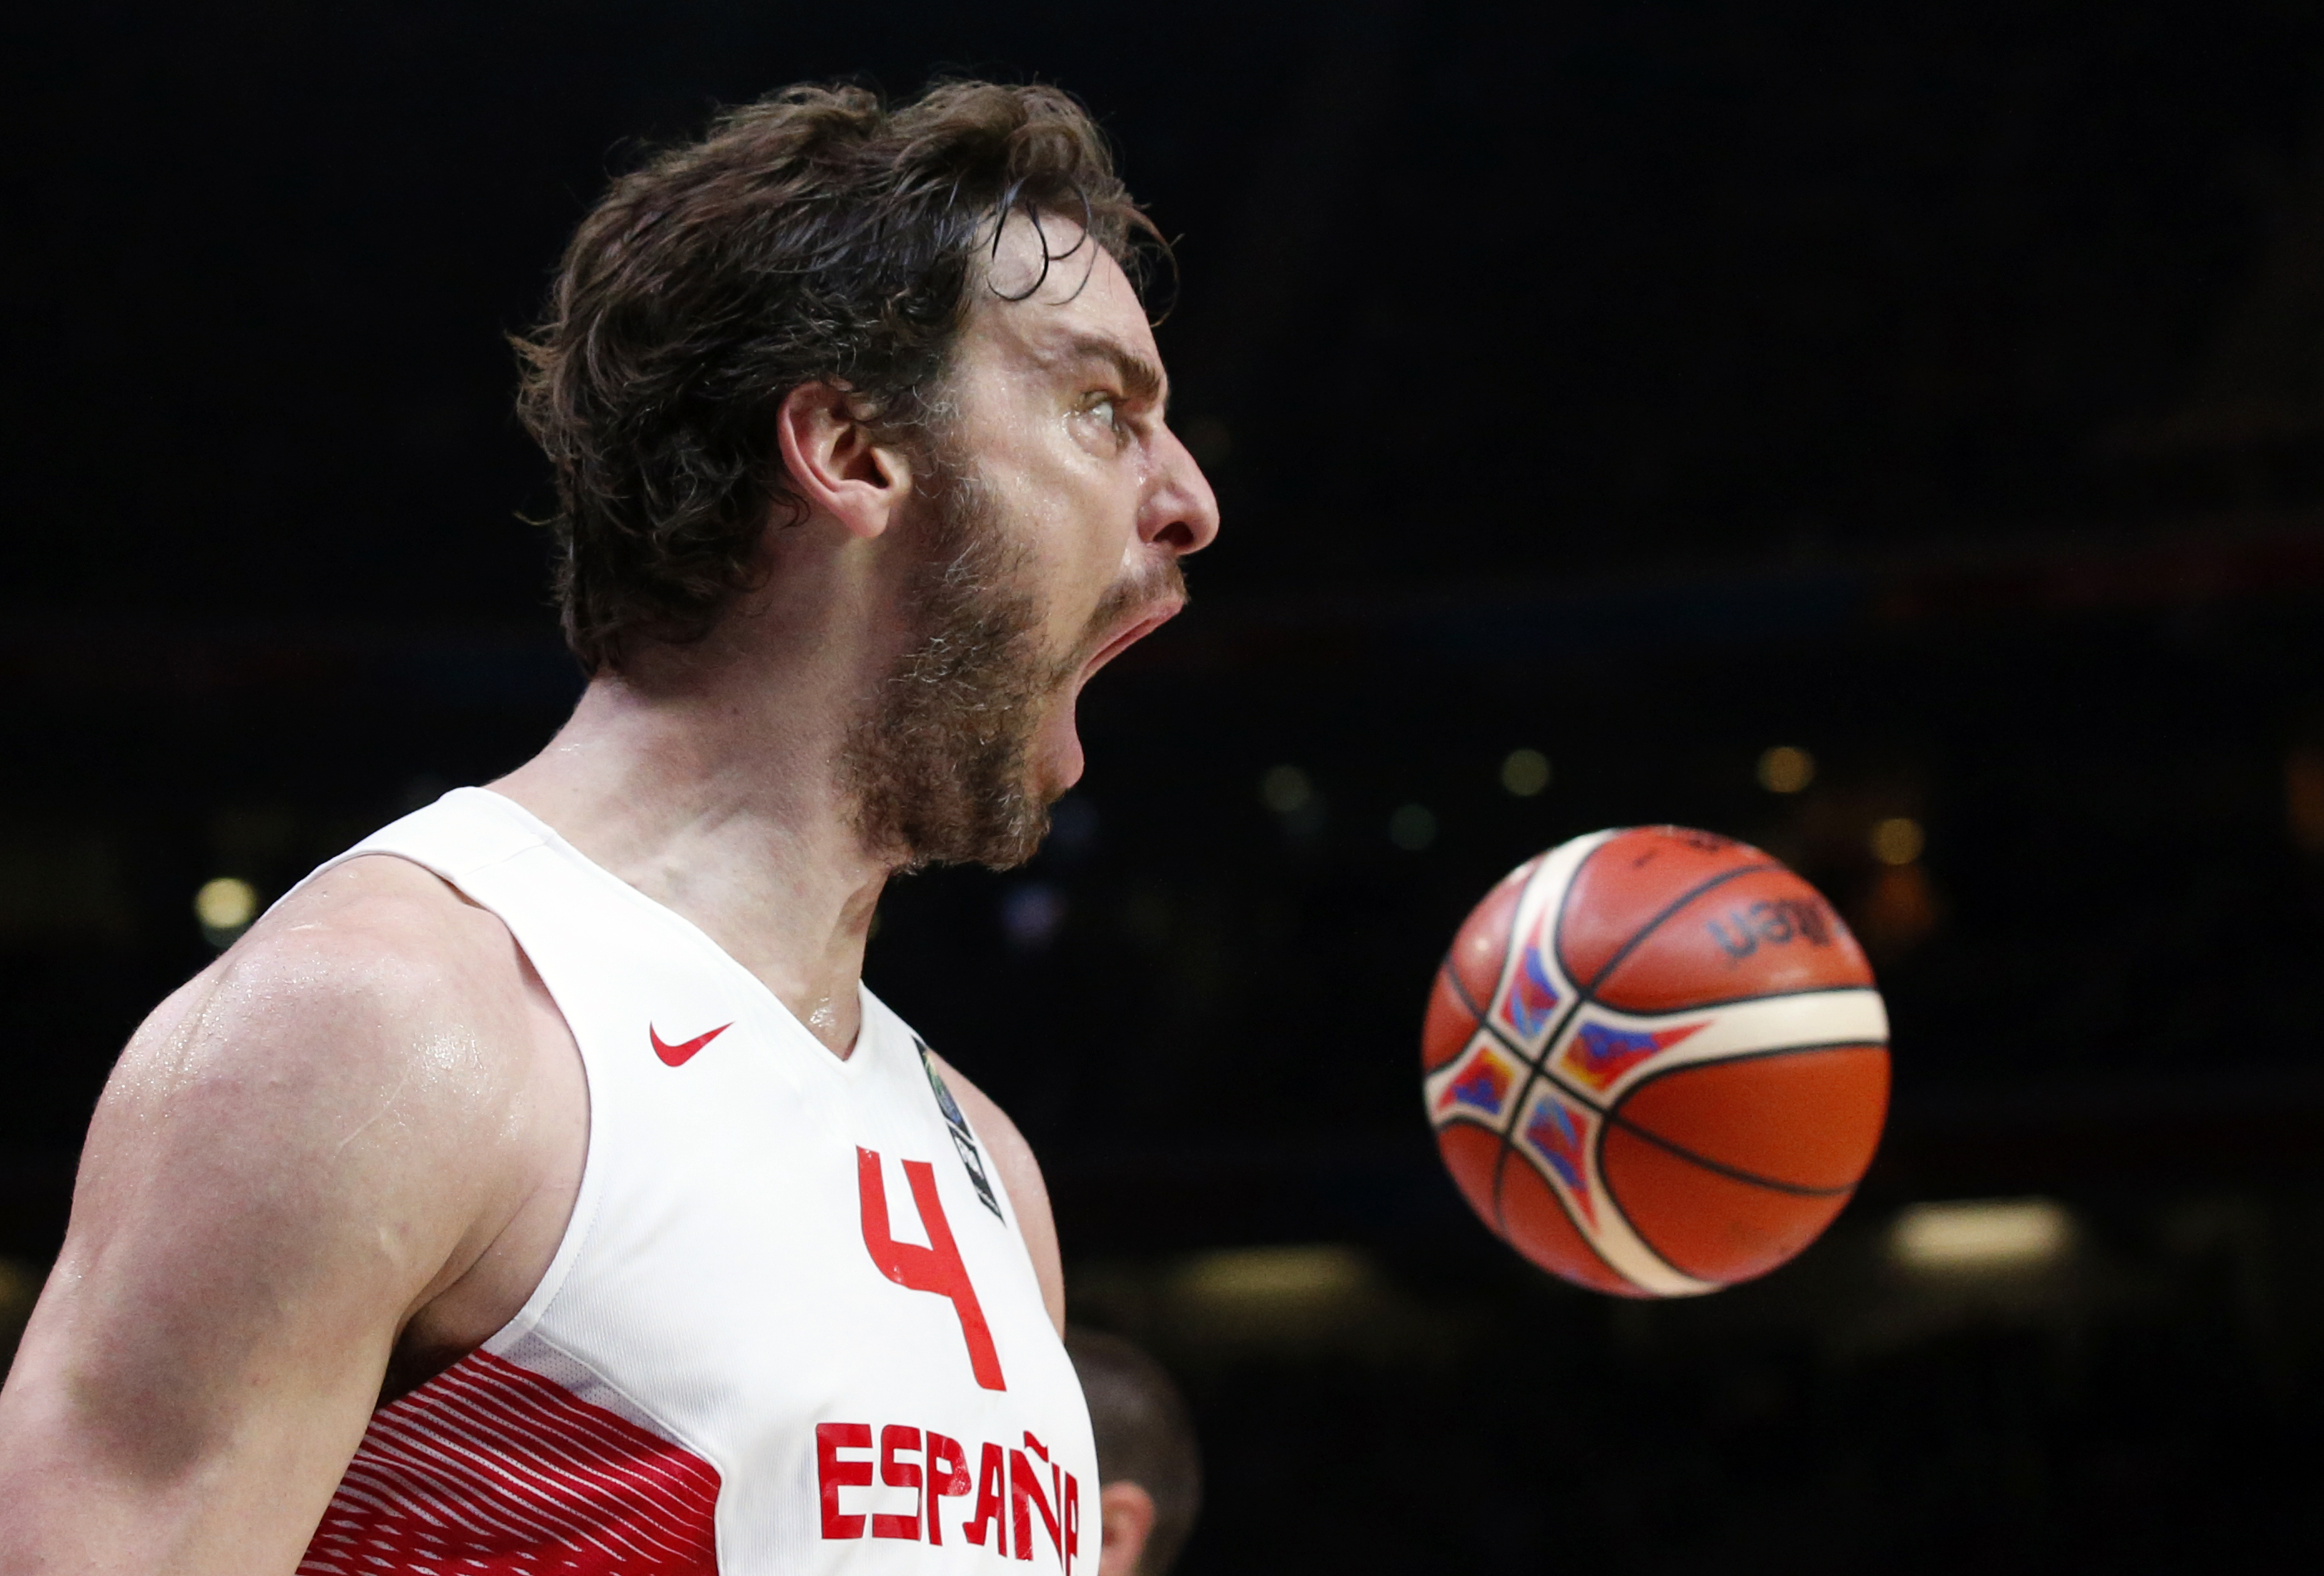 2796x1896 Free download Pau Gasol Wallpapers High Resolution and Quality Download [] for your Desktop, Mobile \u0026 Tablet | Explore 77+ Pau Gasol Wallpaper | Pau Gasol Wallpaper, Pau Gasol Wallpapers